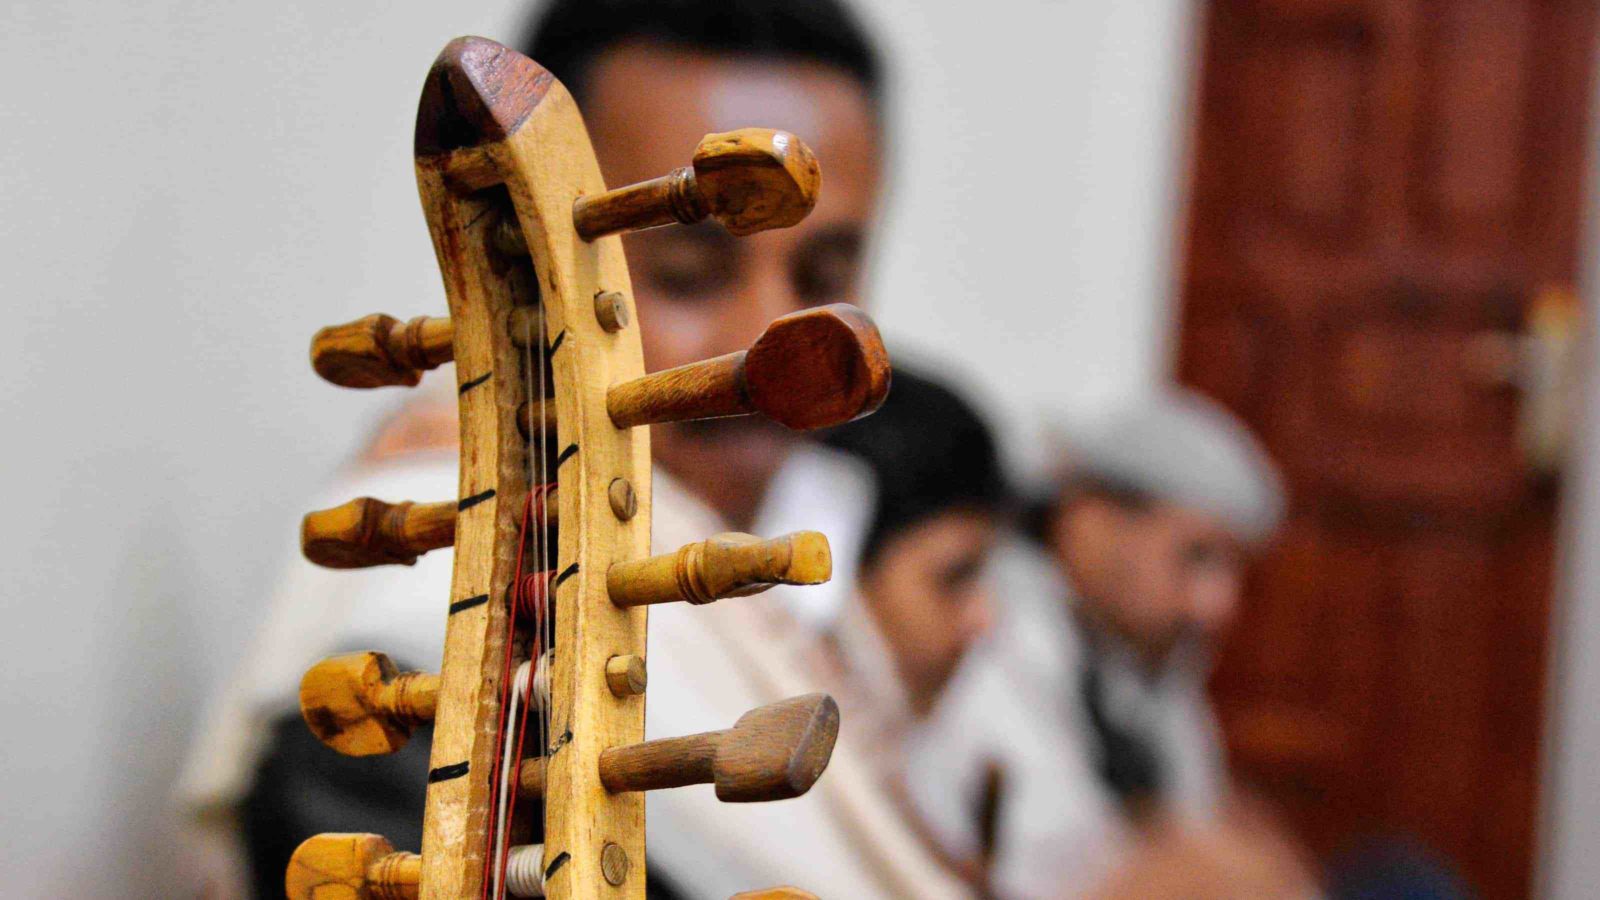 The tuning pegs of an Oud, an Arab stringed instrument, show the curve of the instrument's wooden head. Creative Commons courtesy photo